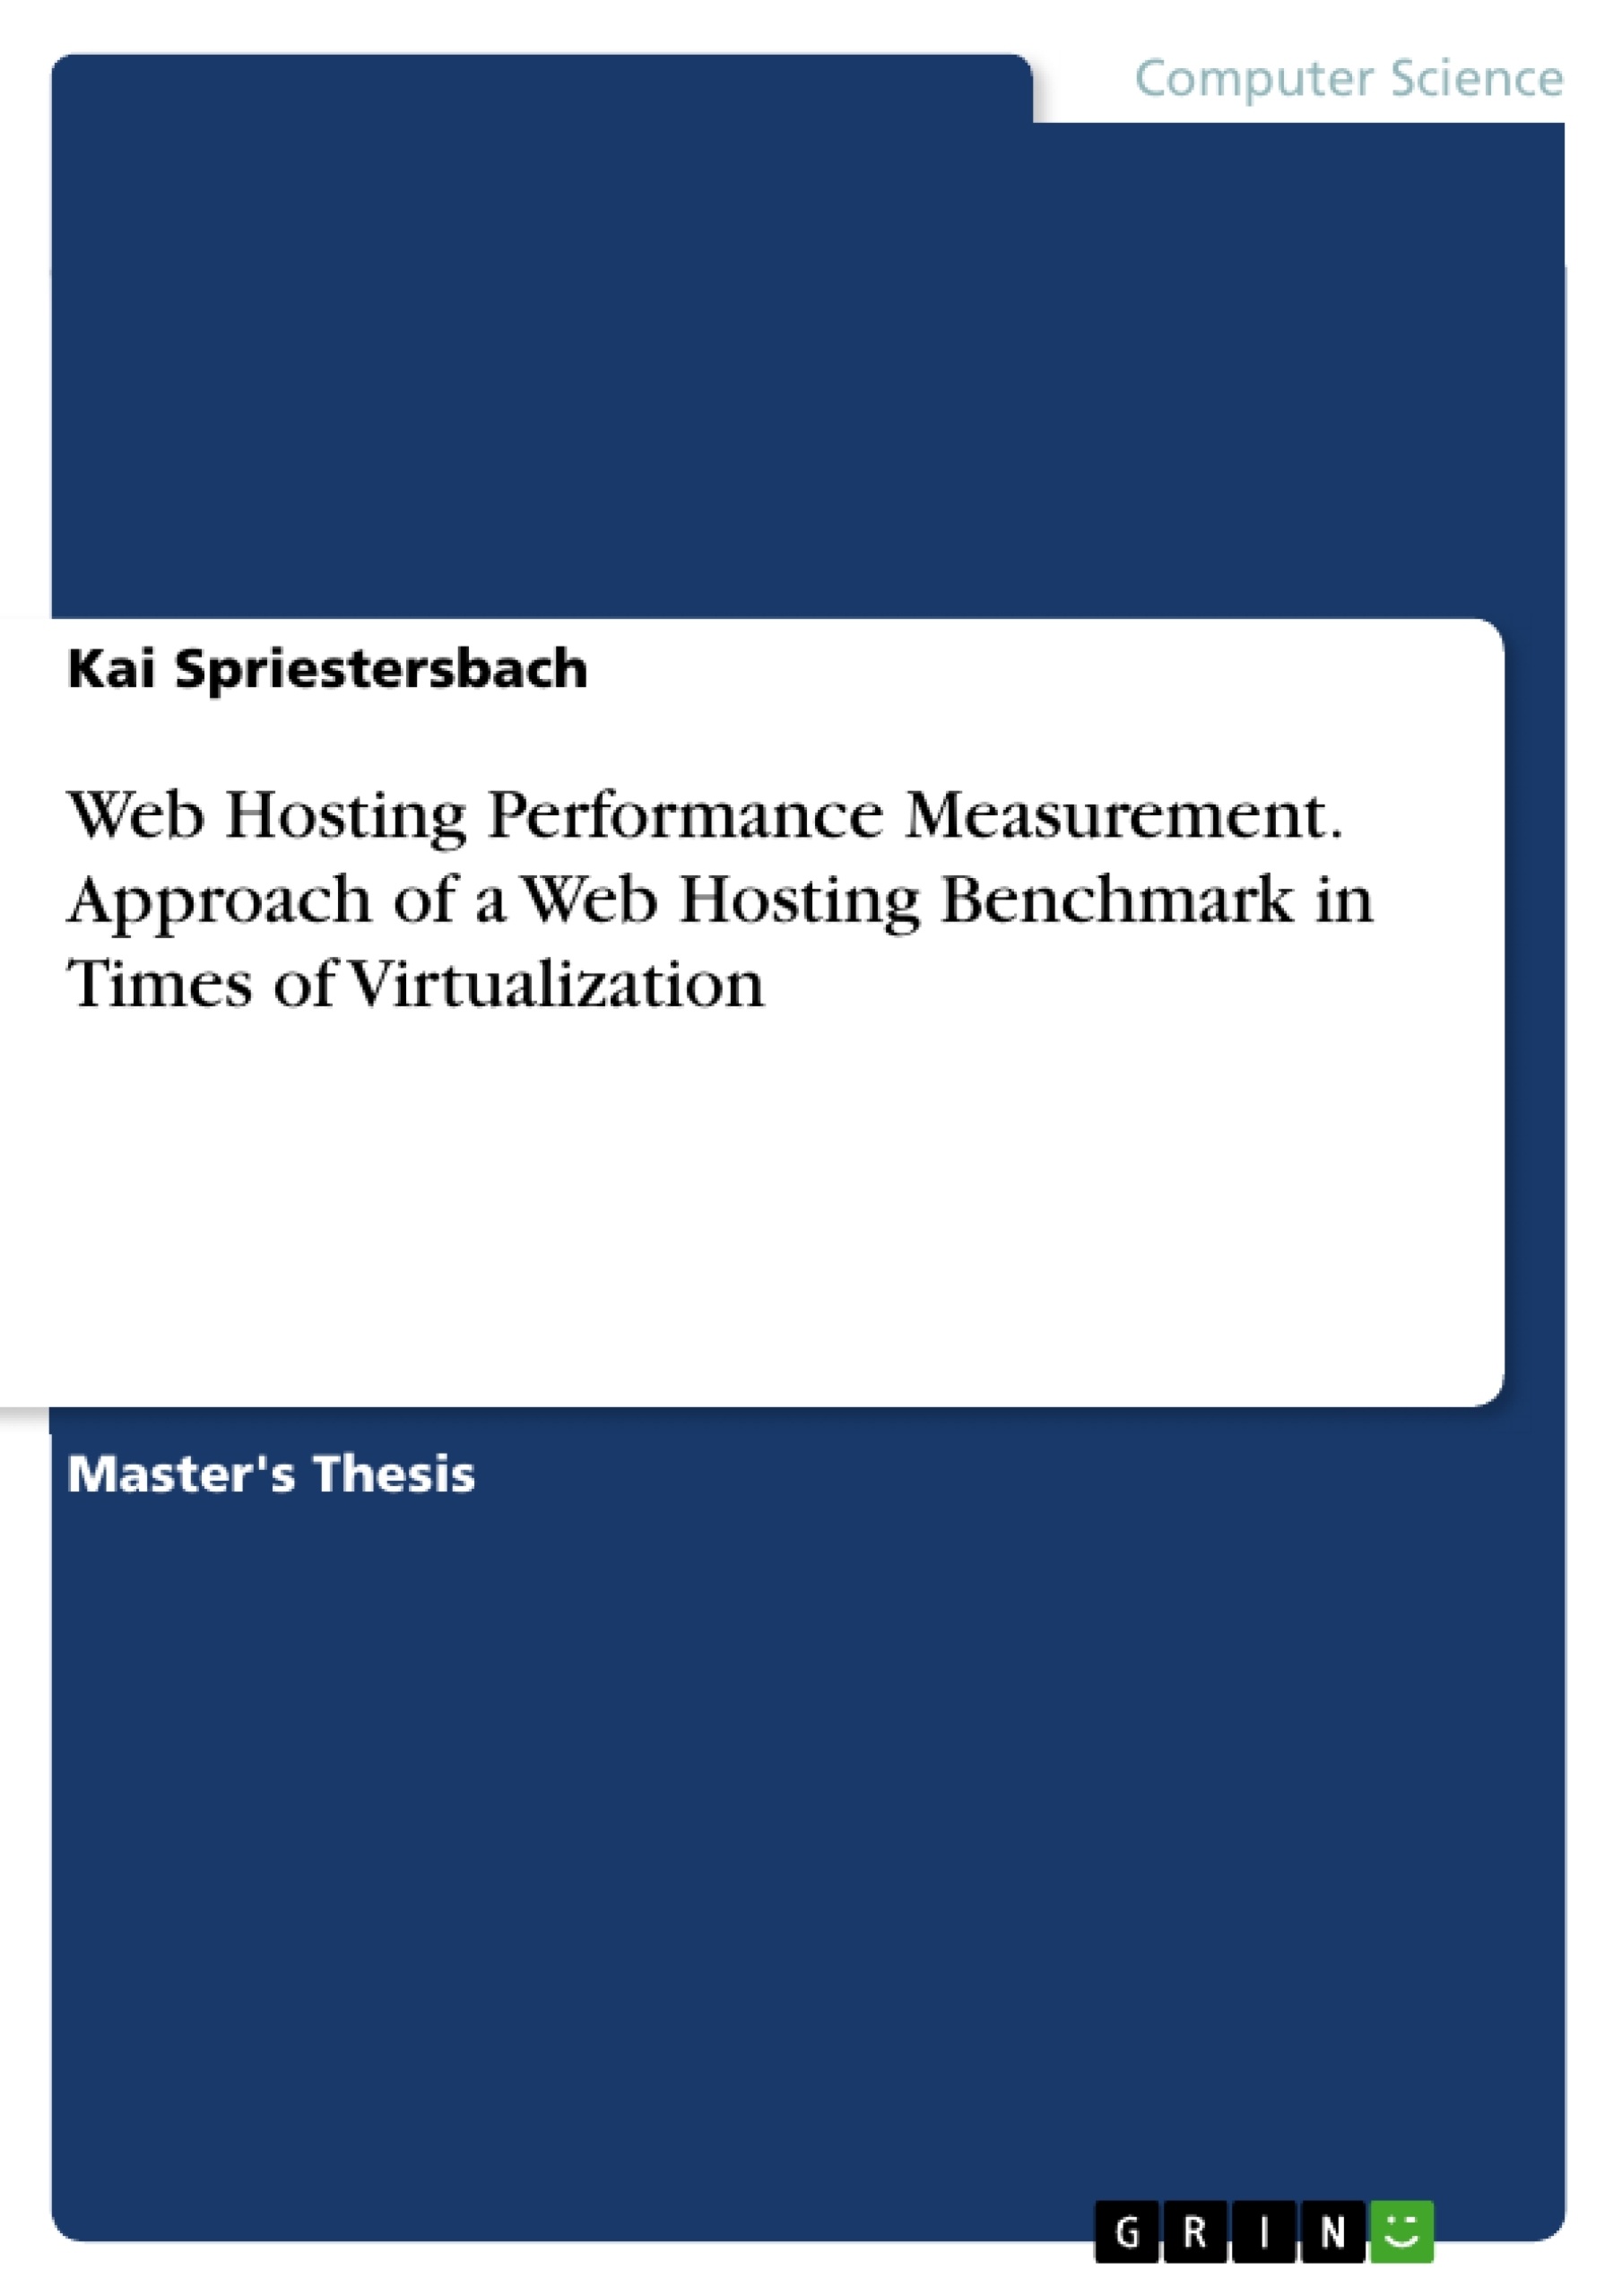 Título: Web Hosting Performance Measurement. Approach of a Web Hosting Benchmark in Times of Virtualization